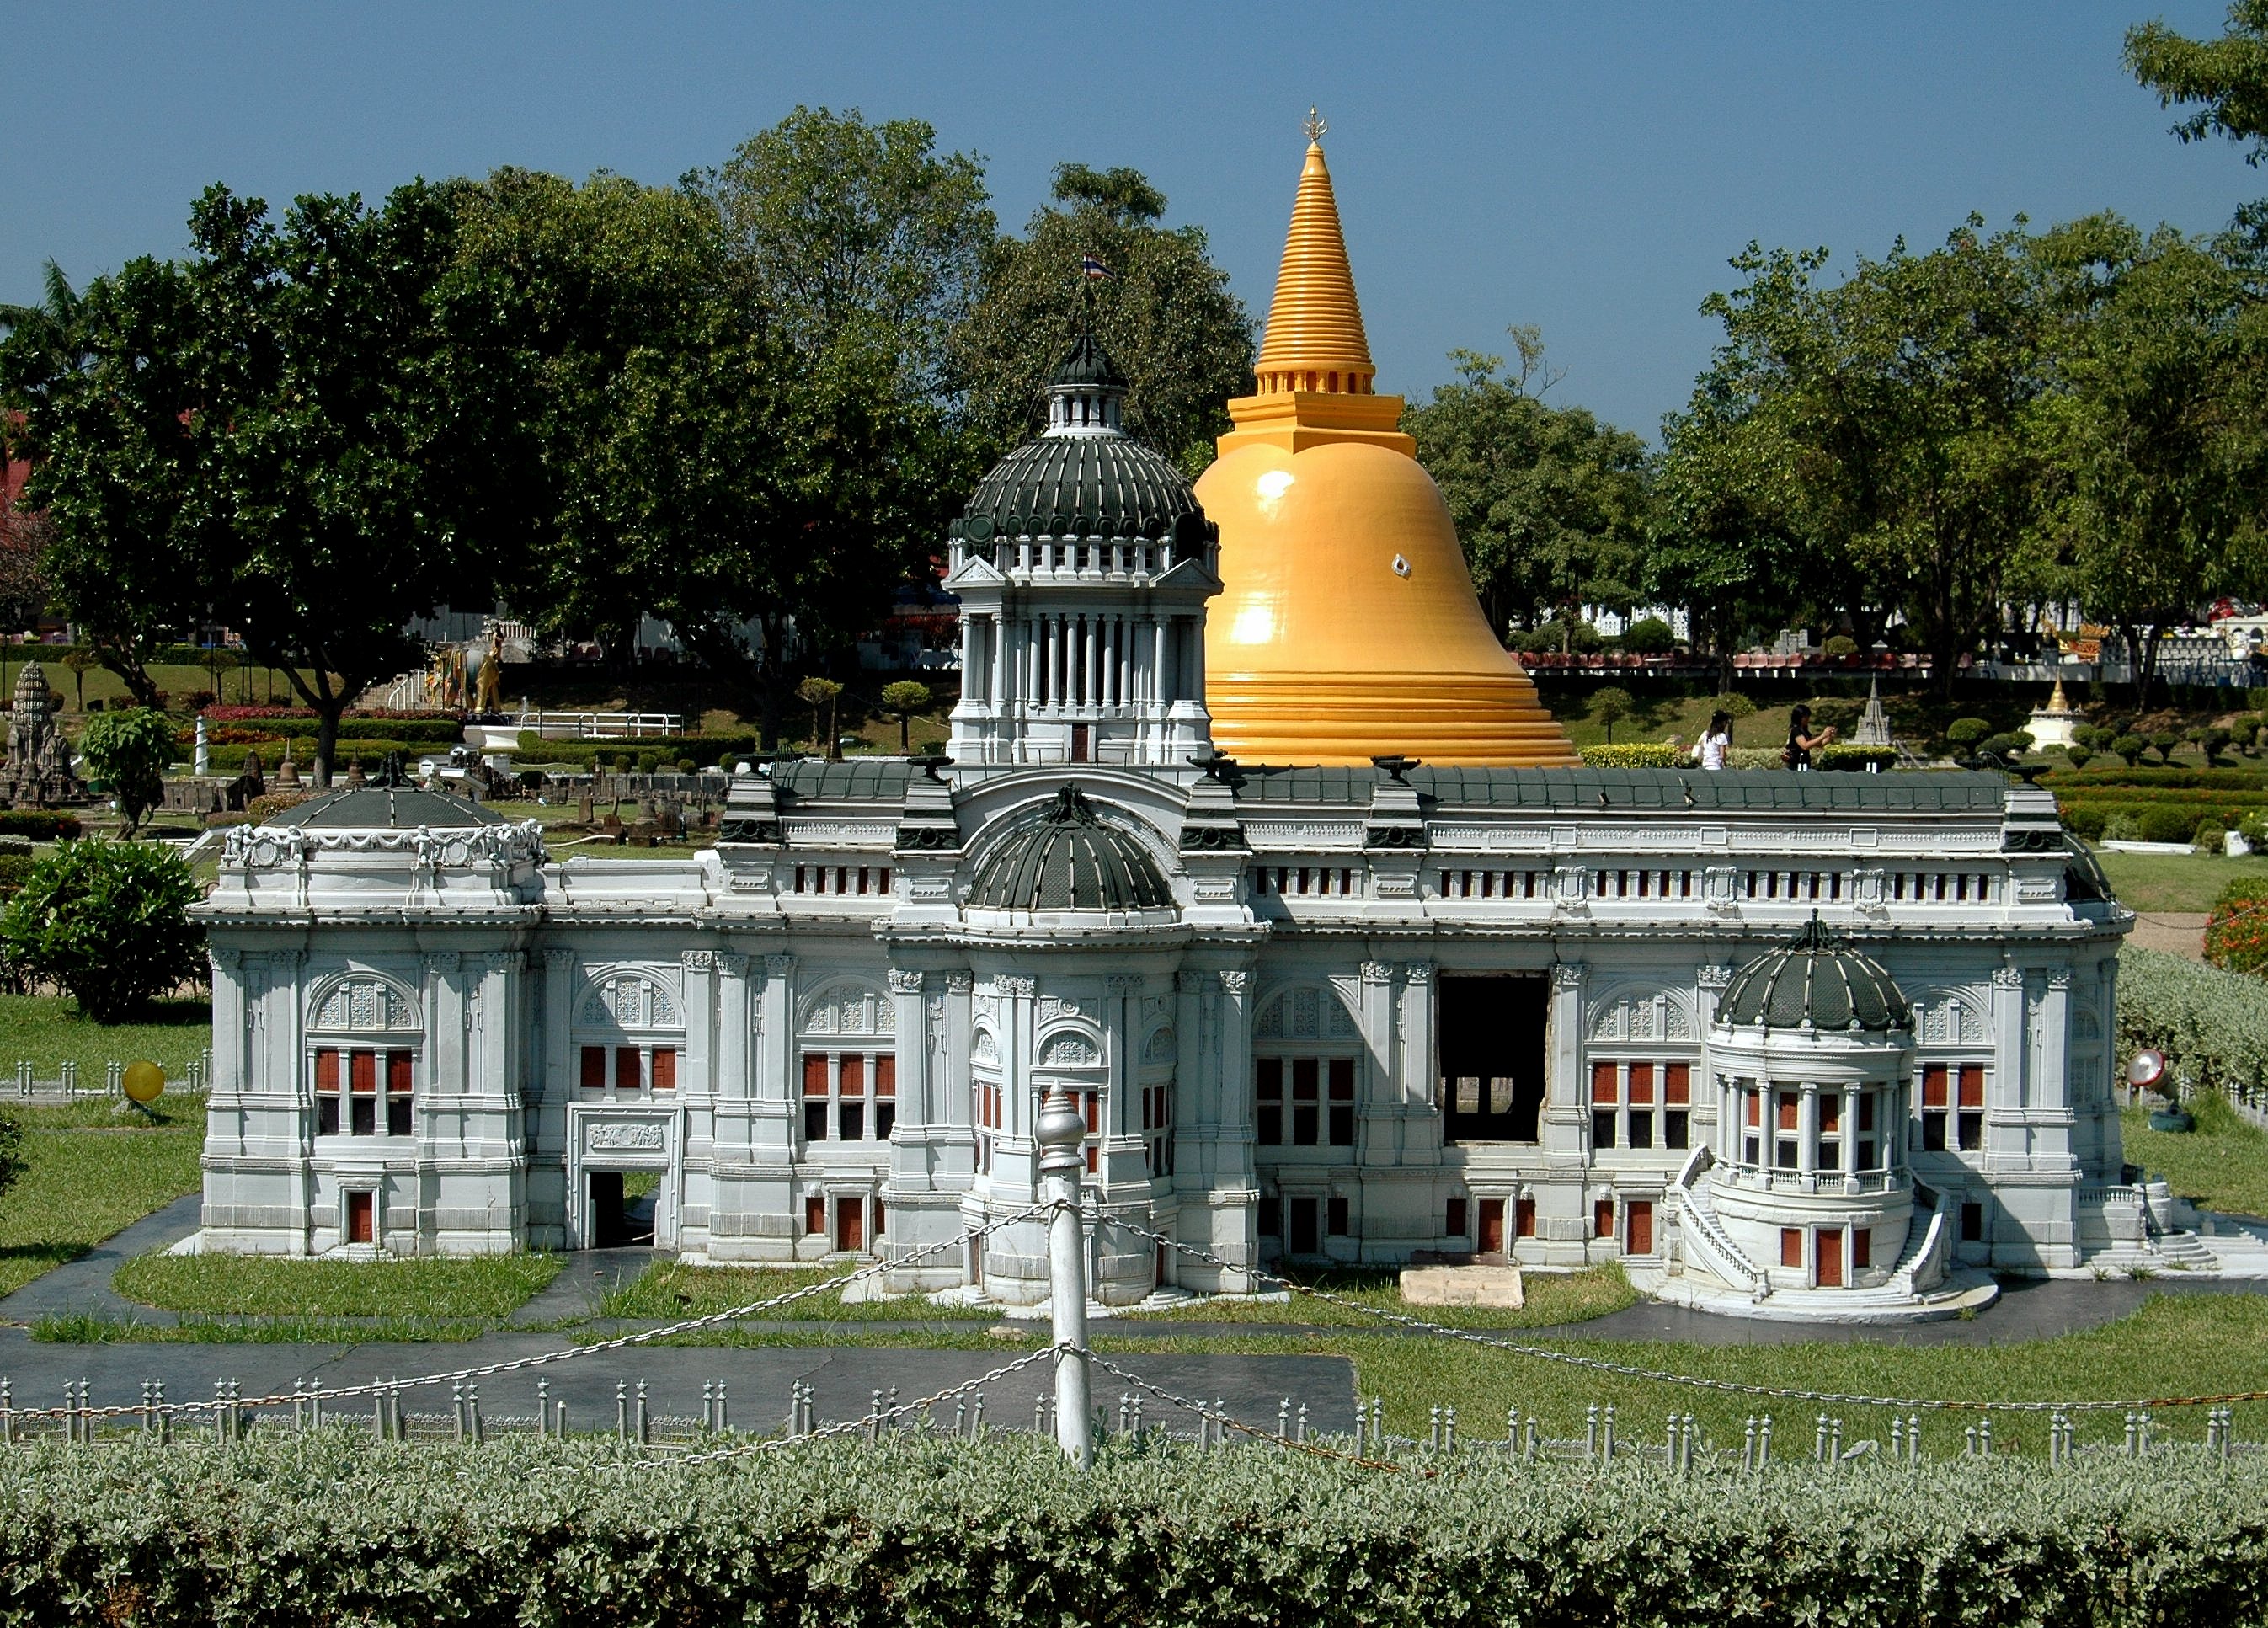 Pattaya, Thailand - December 30, 2005:  Bangkok's marble throne hall and the golden chedi at Nakhom Pathom in miniature at Mini Siam outdoor theme park